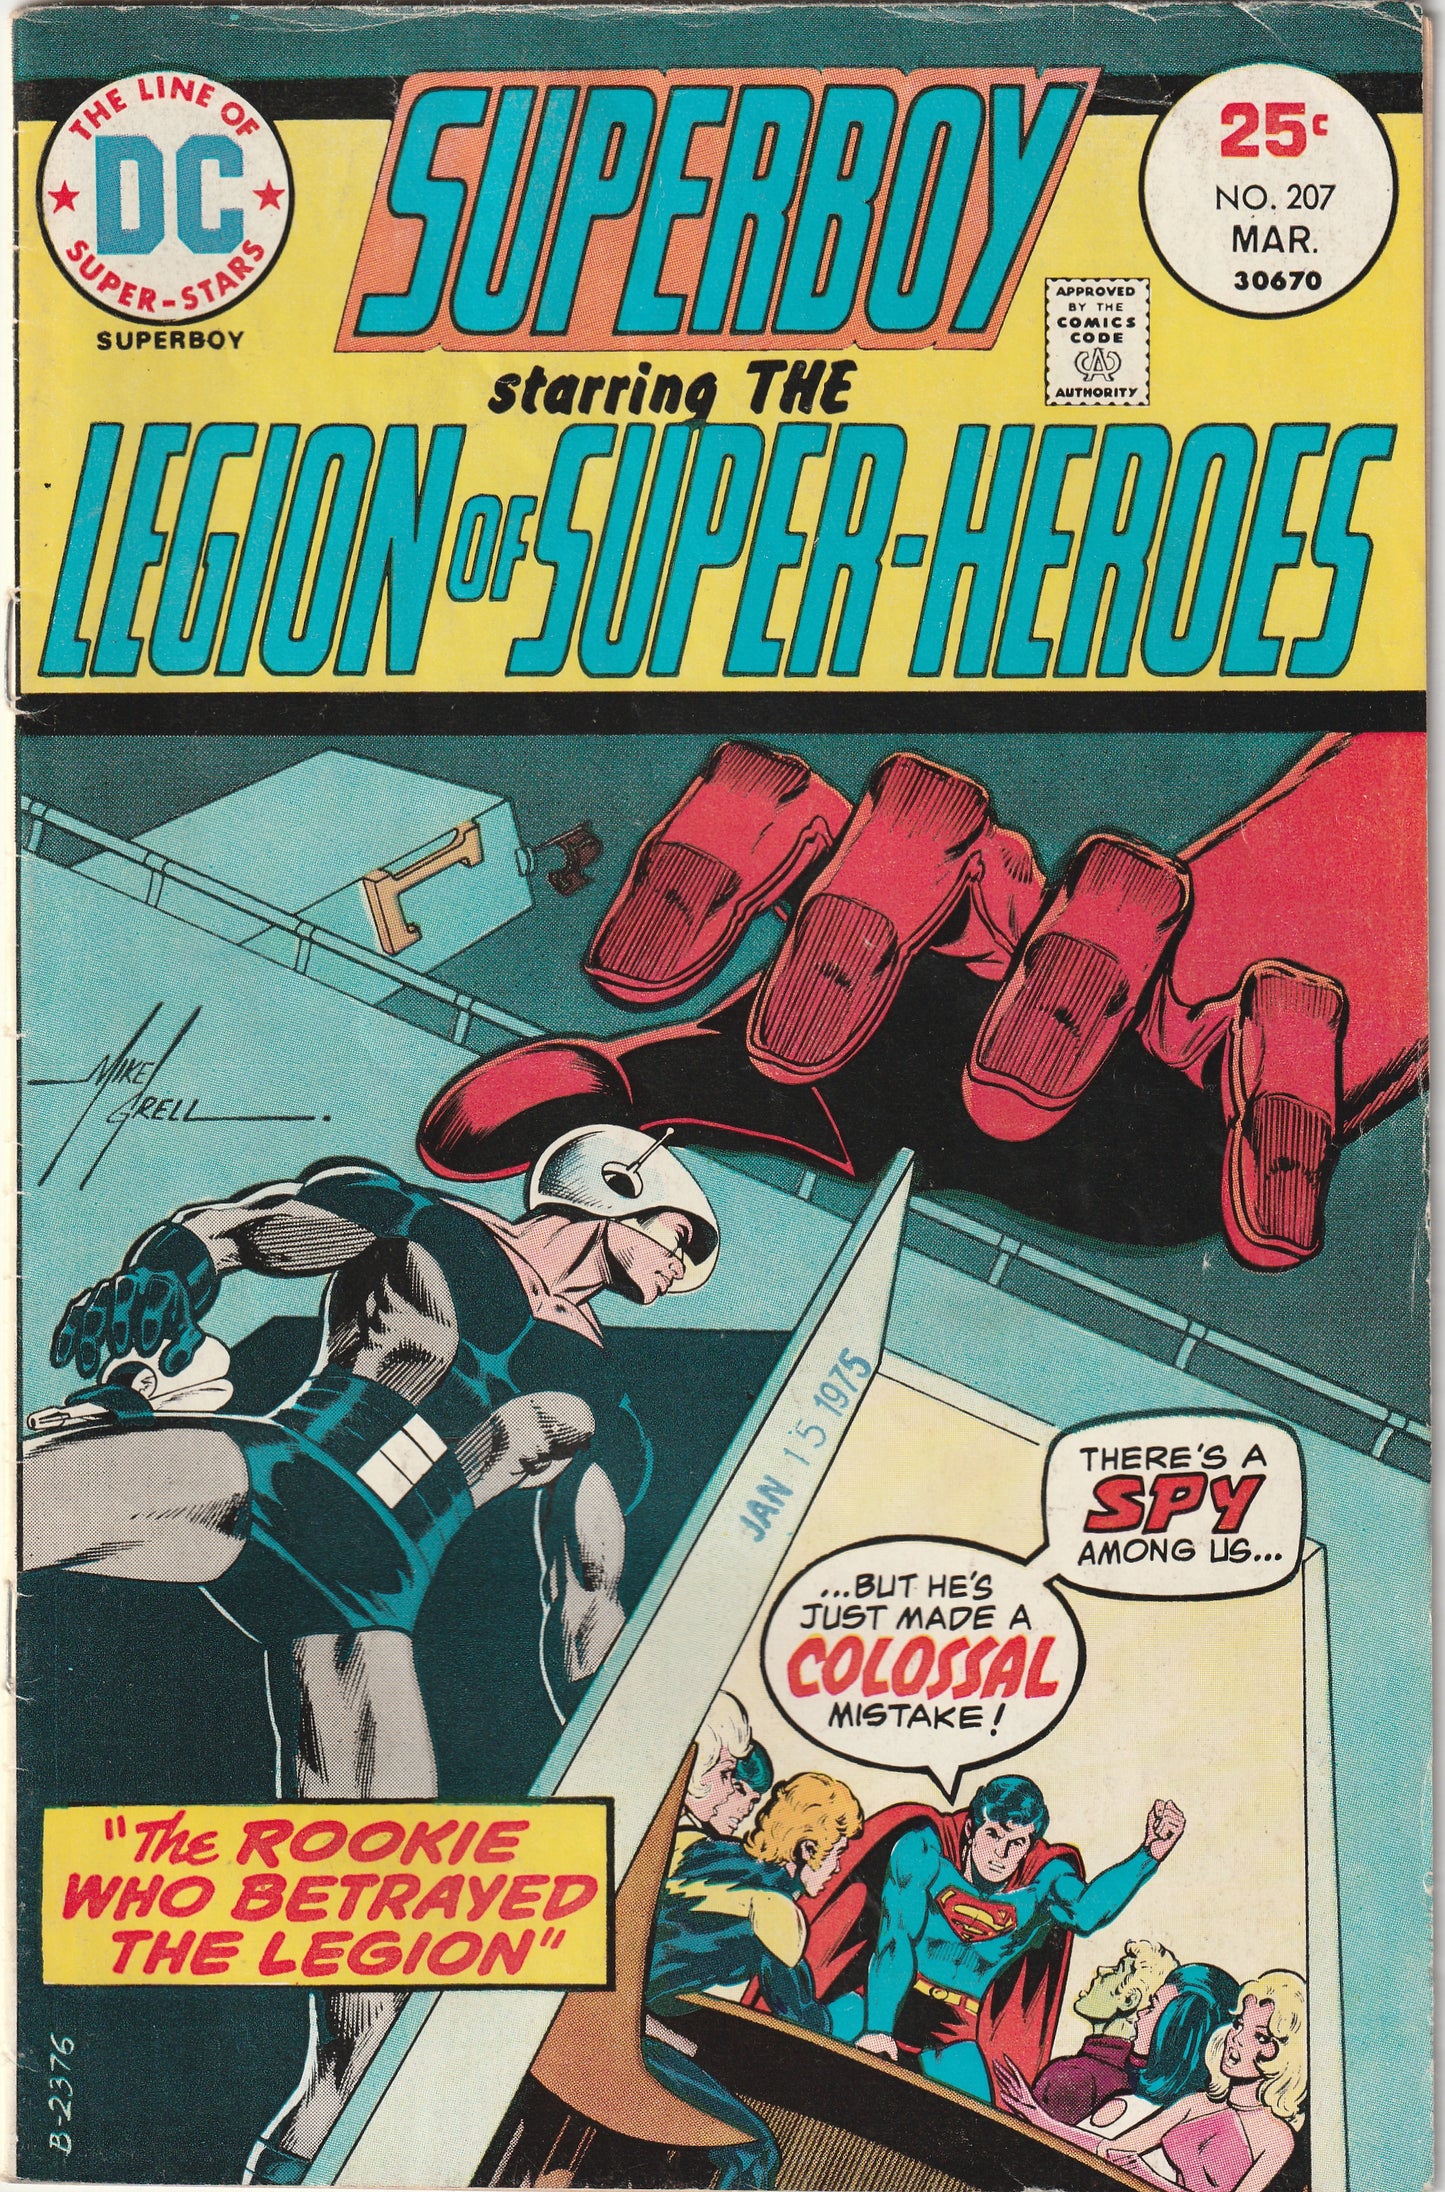 Superboy #207 (1975) - Starring the Legion of Super-Heroes